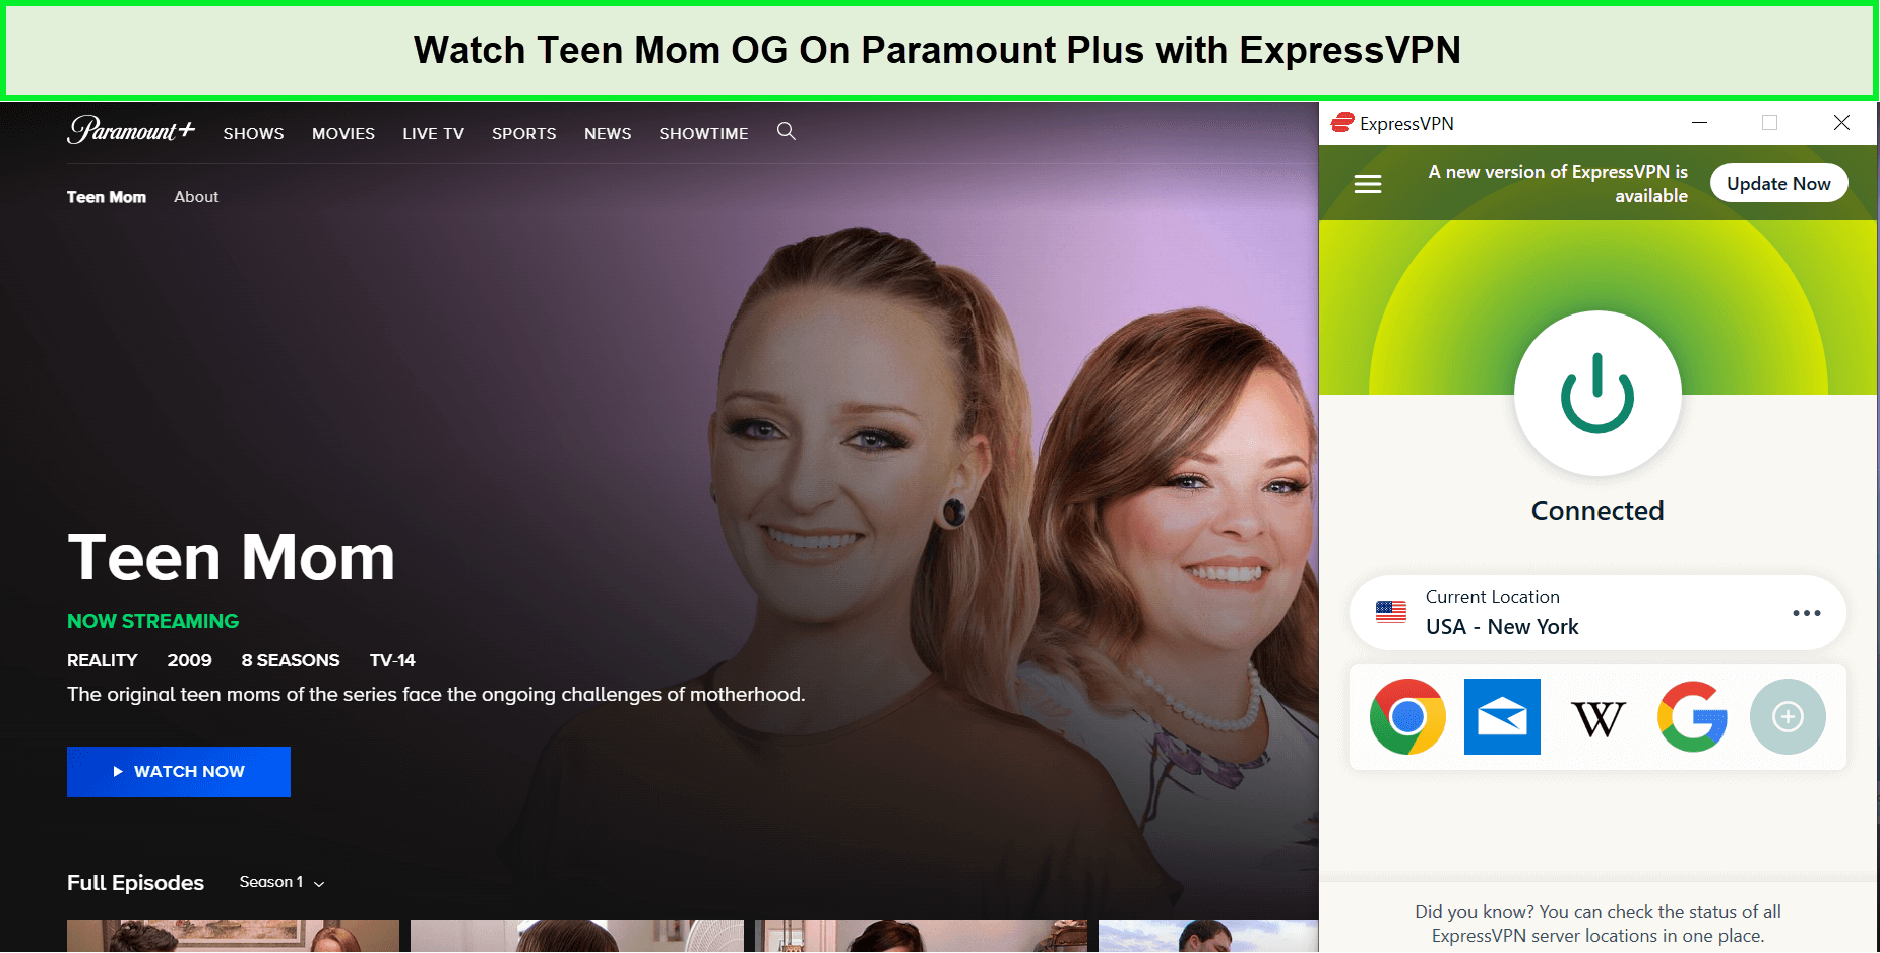 Watch-Teen-Mom-OG-Season-9-in-Spain-On-Paramount-Plus-with-ExpressVPN